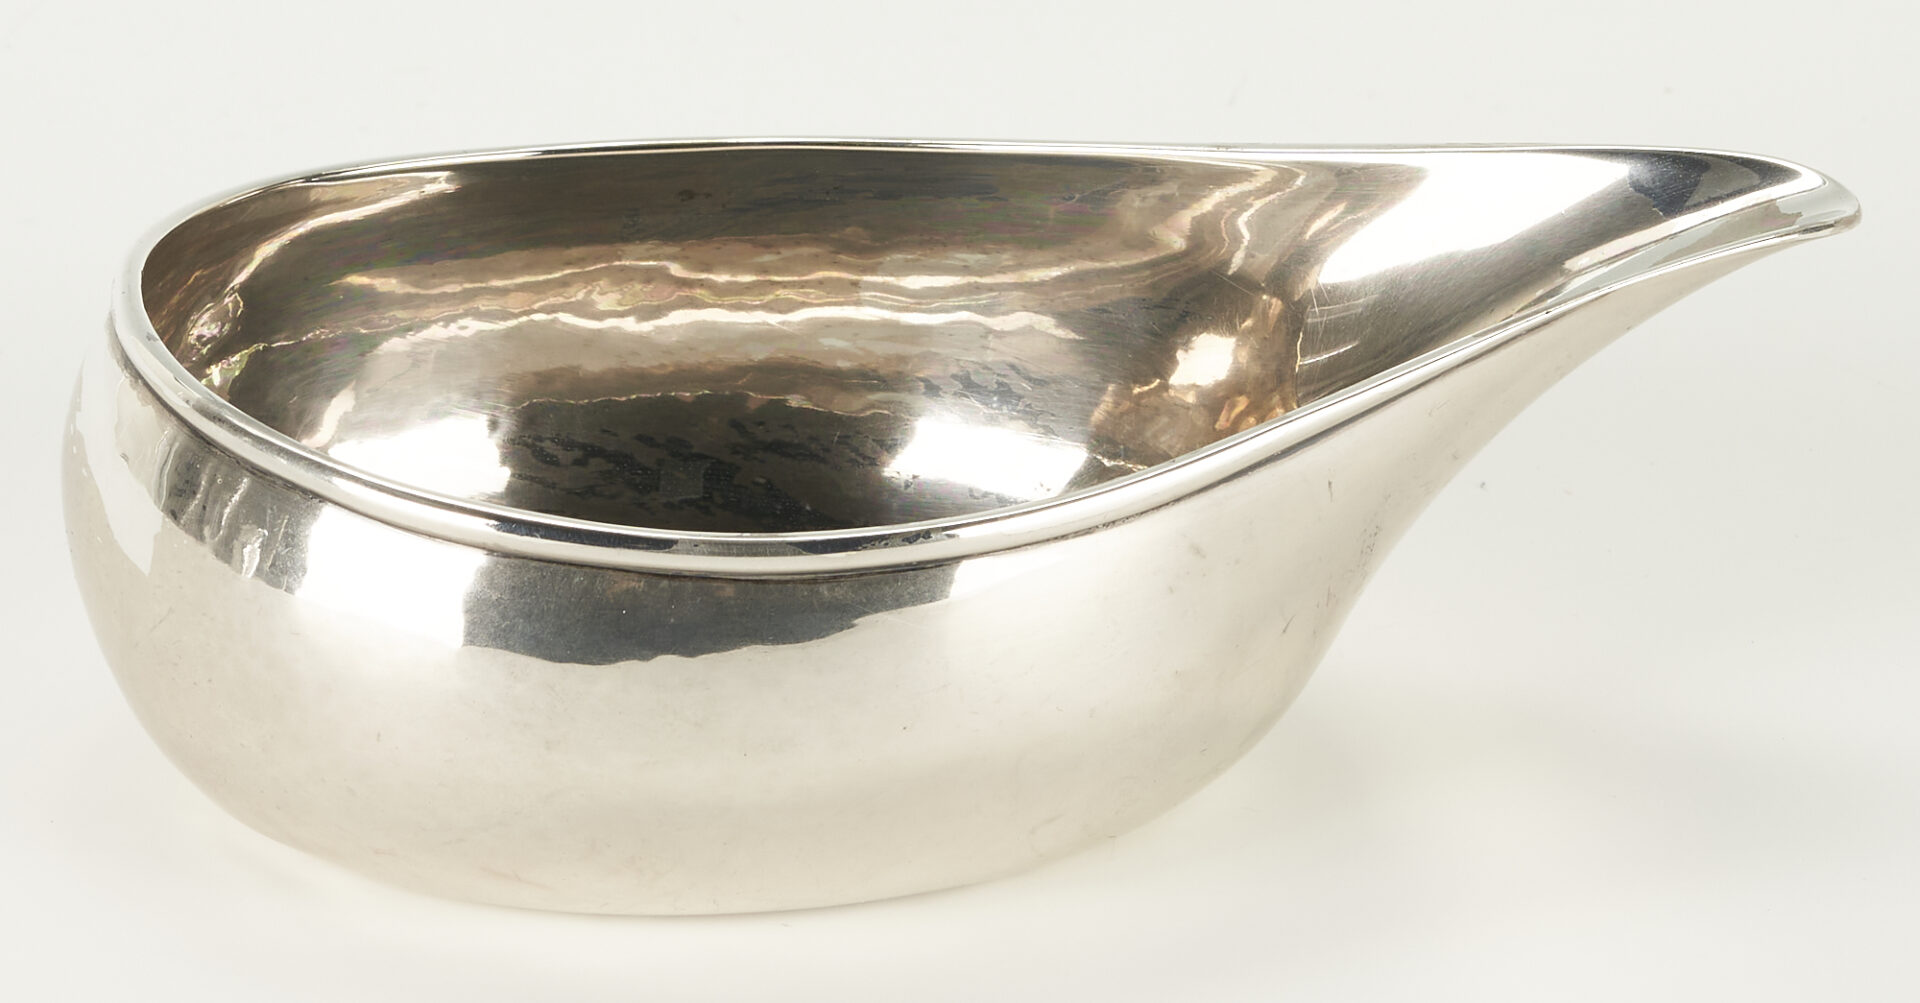 Lot 82: Coin Silver Pap Boat, possibly Georgia